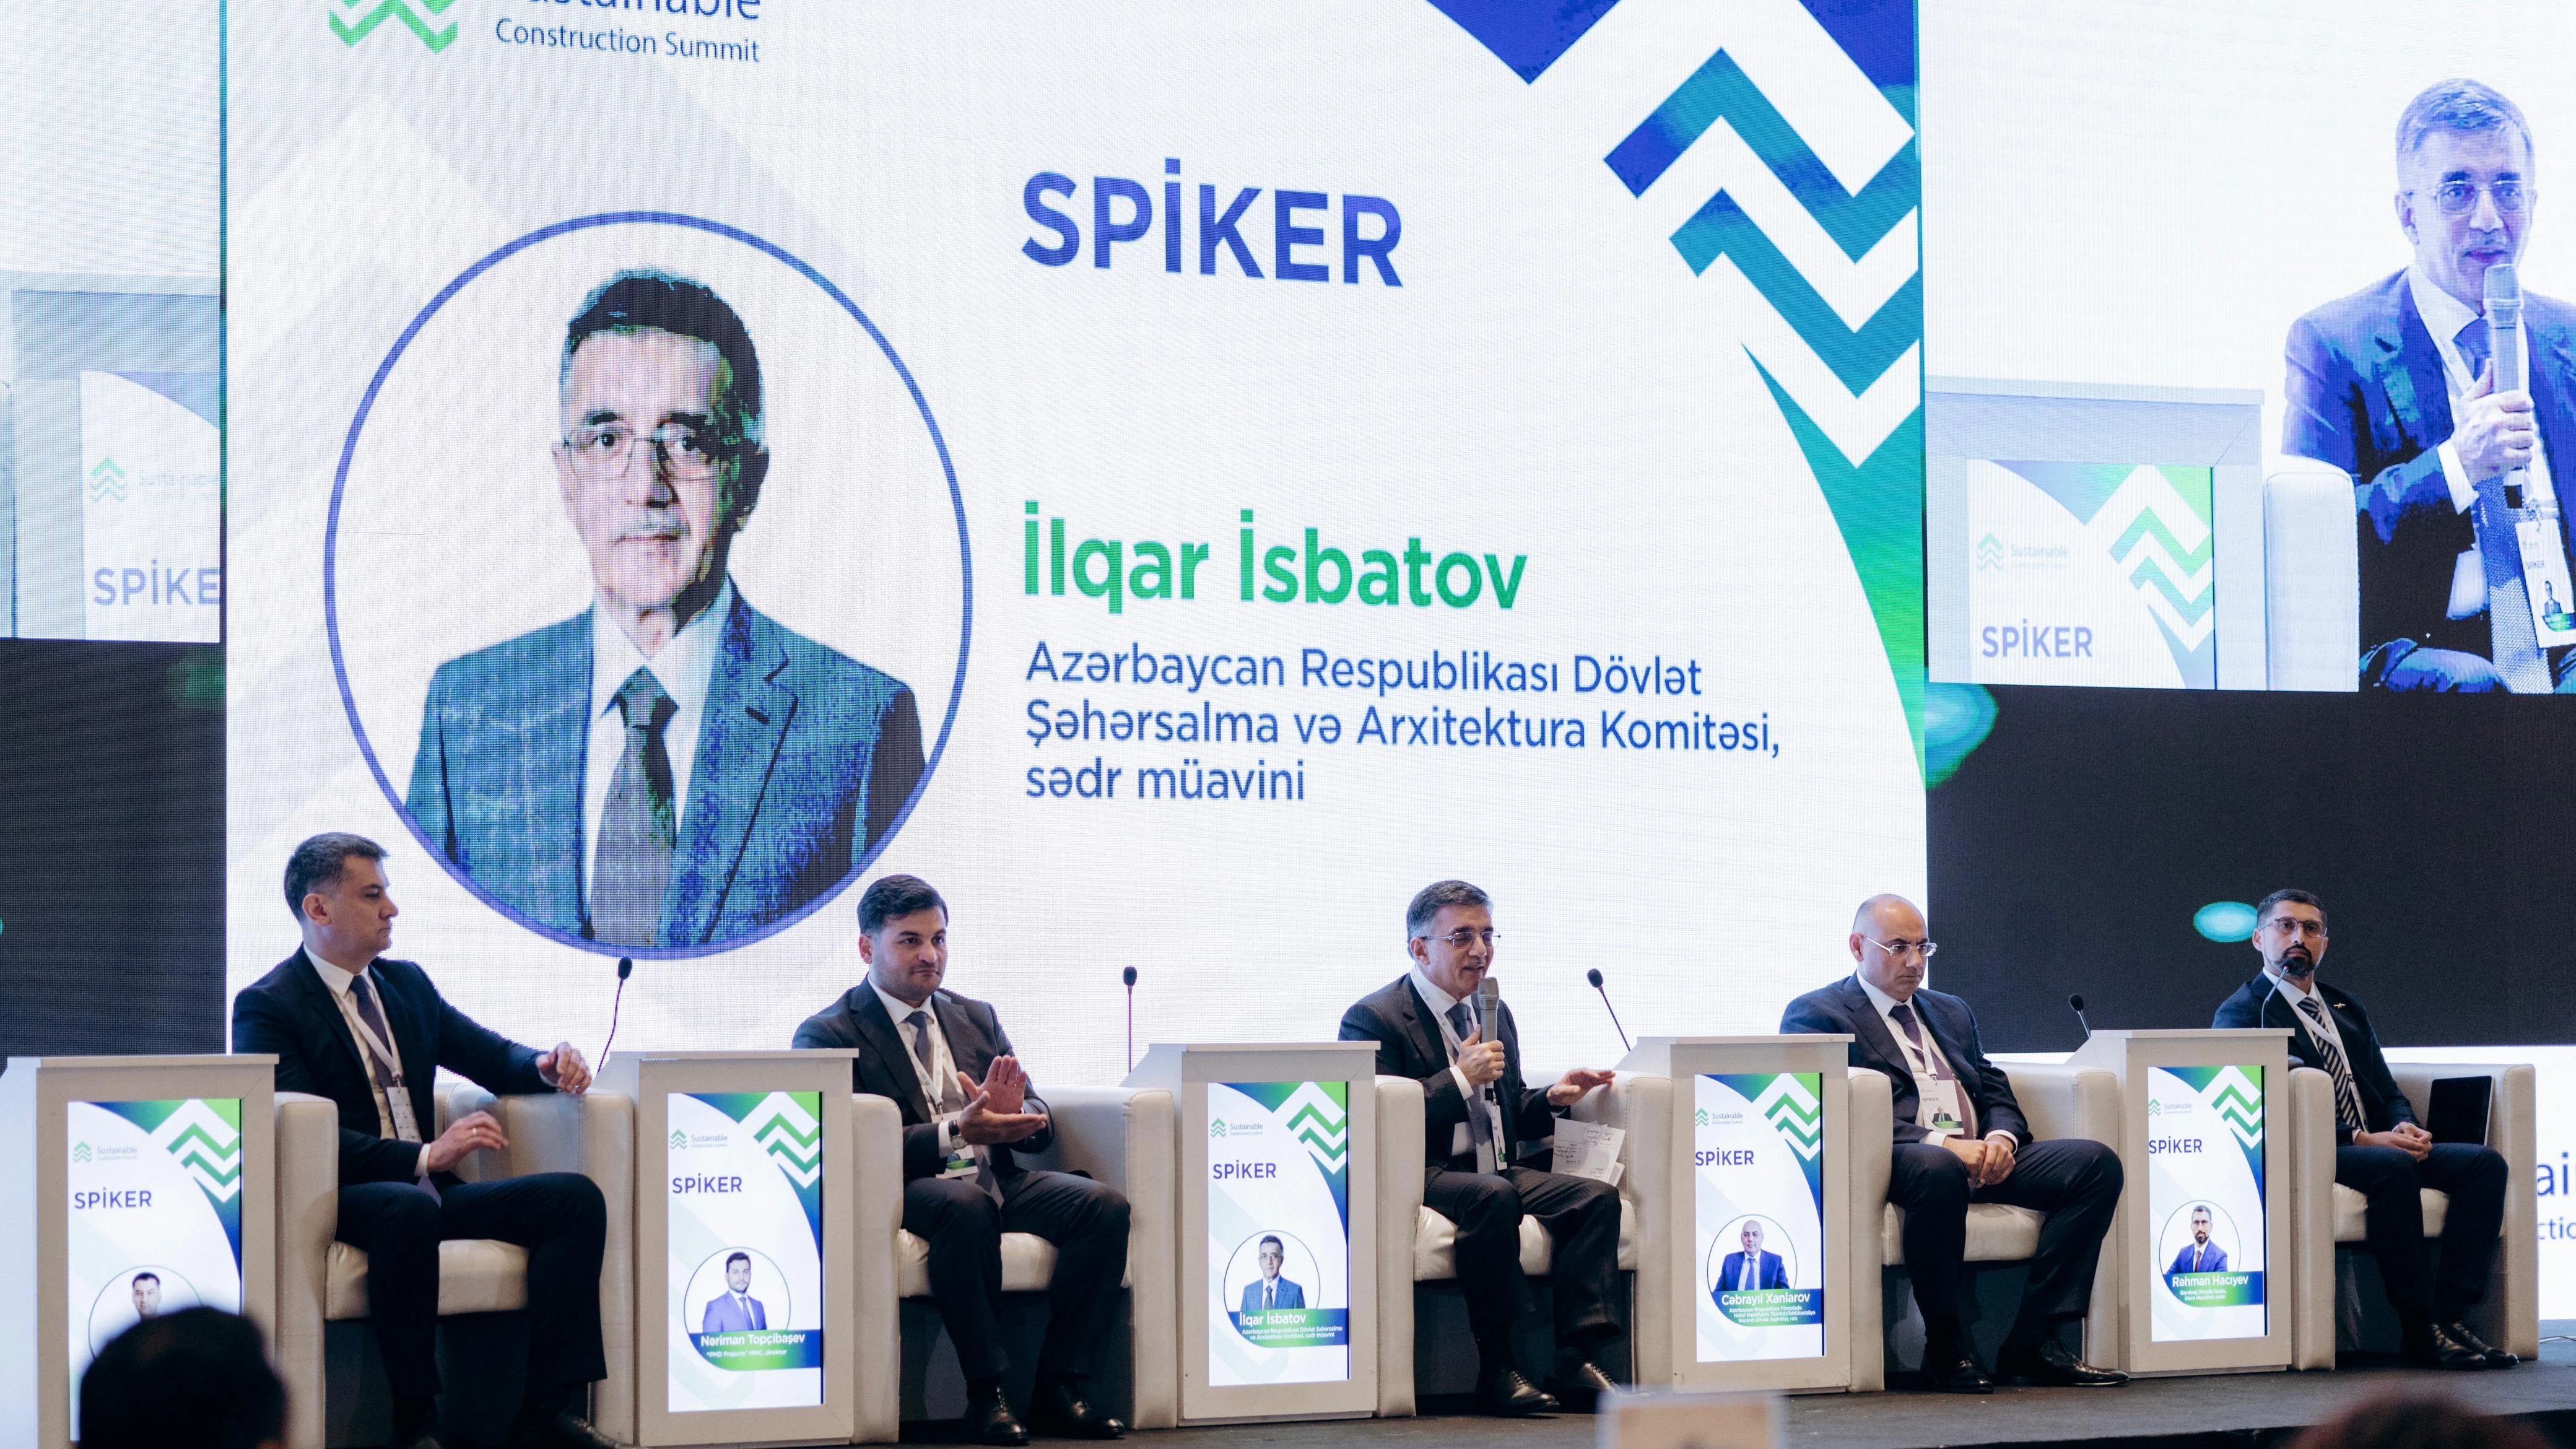 Ilgar Isbatov, Deputy Chairman of the State Committee on Urban Planning and Architecture, presented at the panel discussions of the “Sustainable Construction Summit”